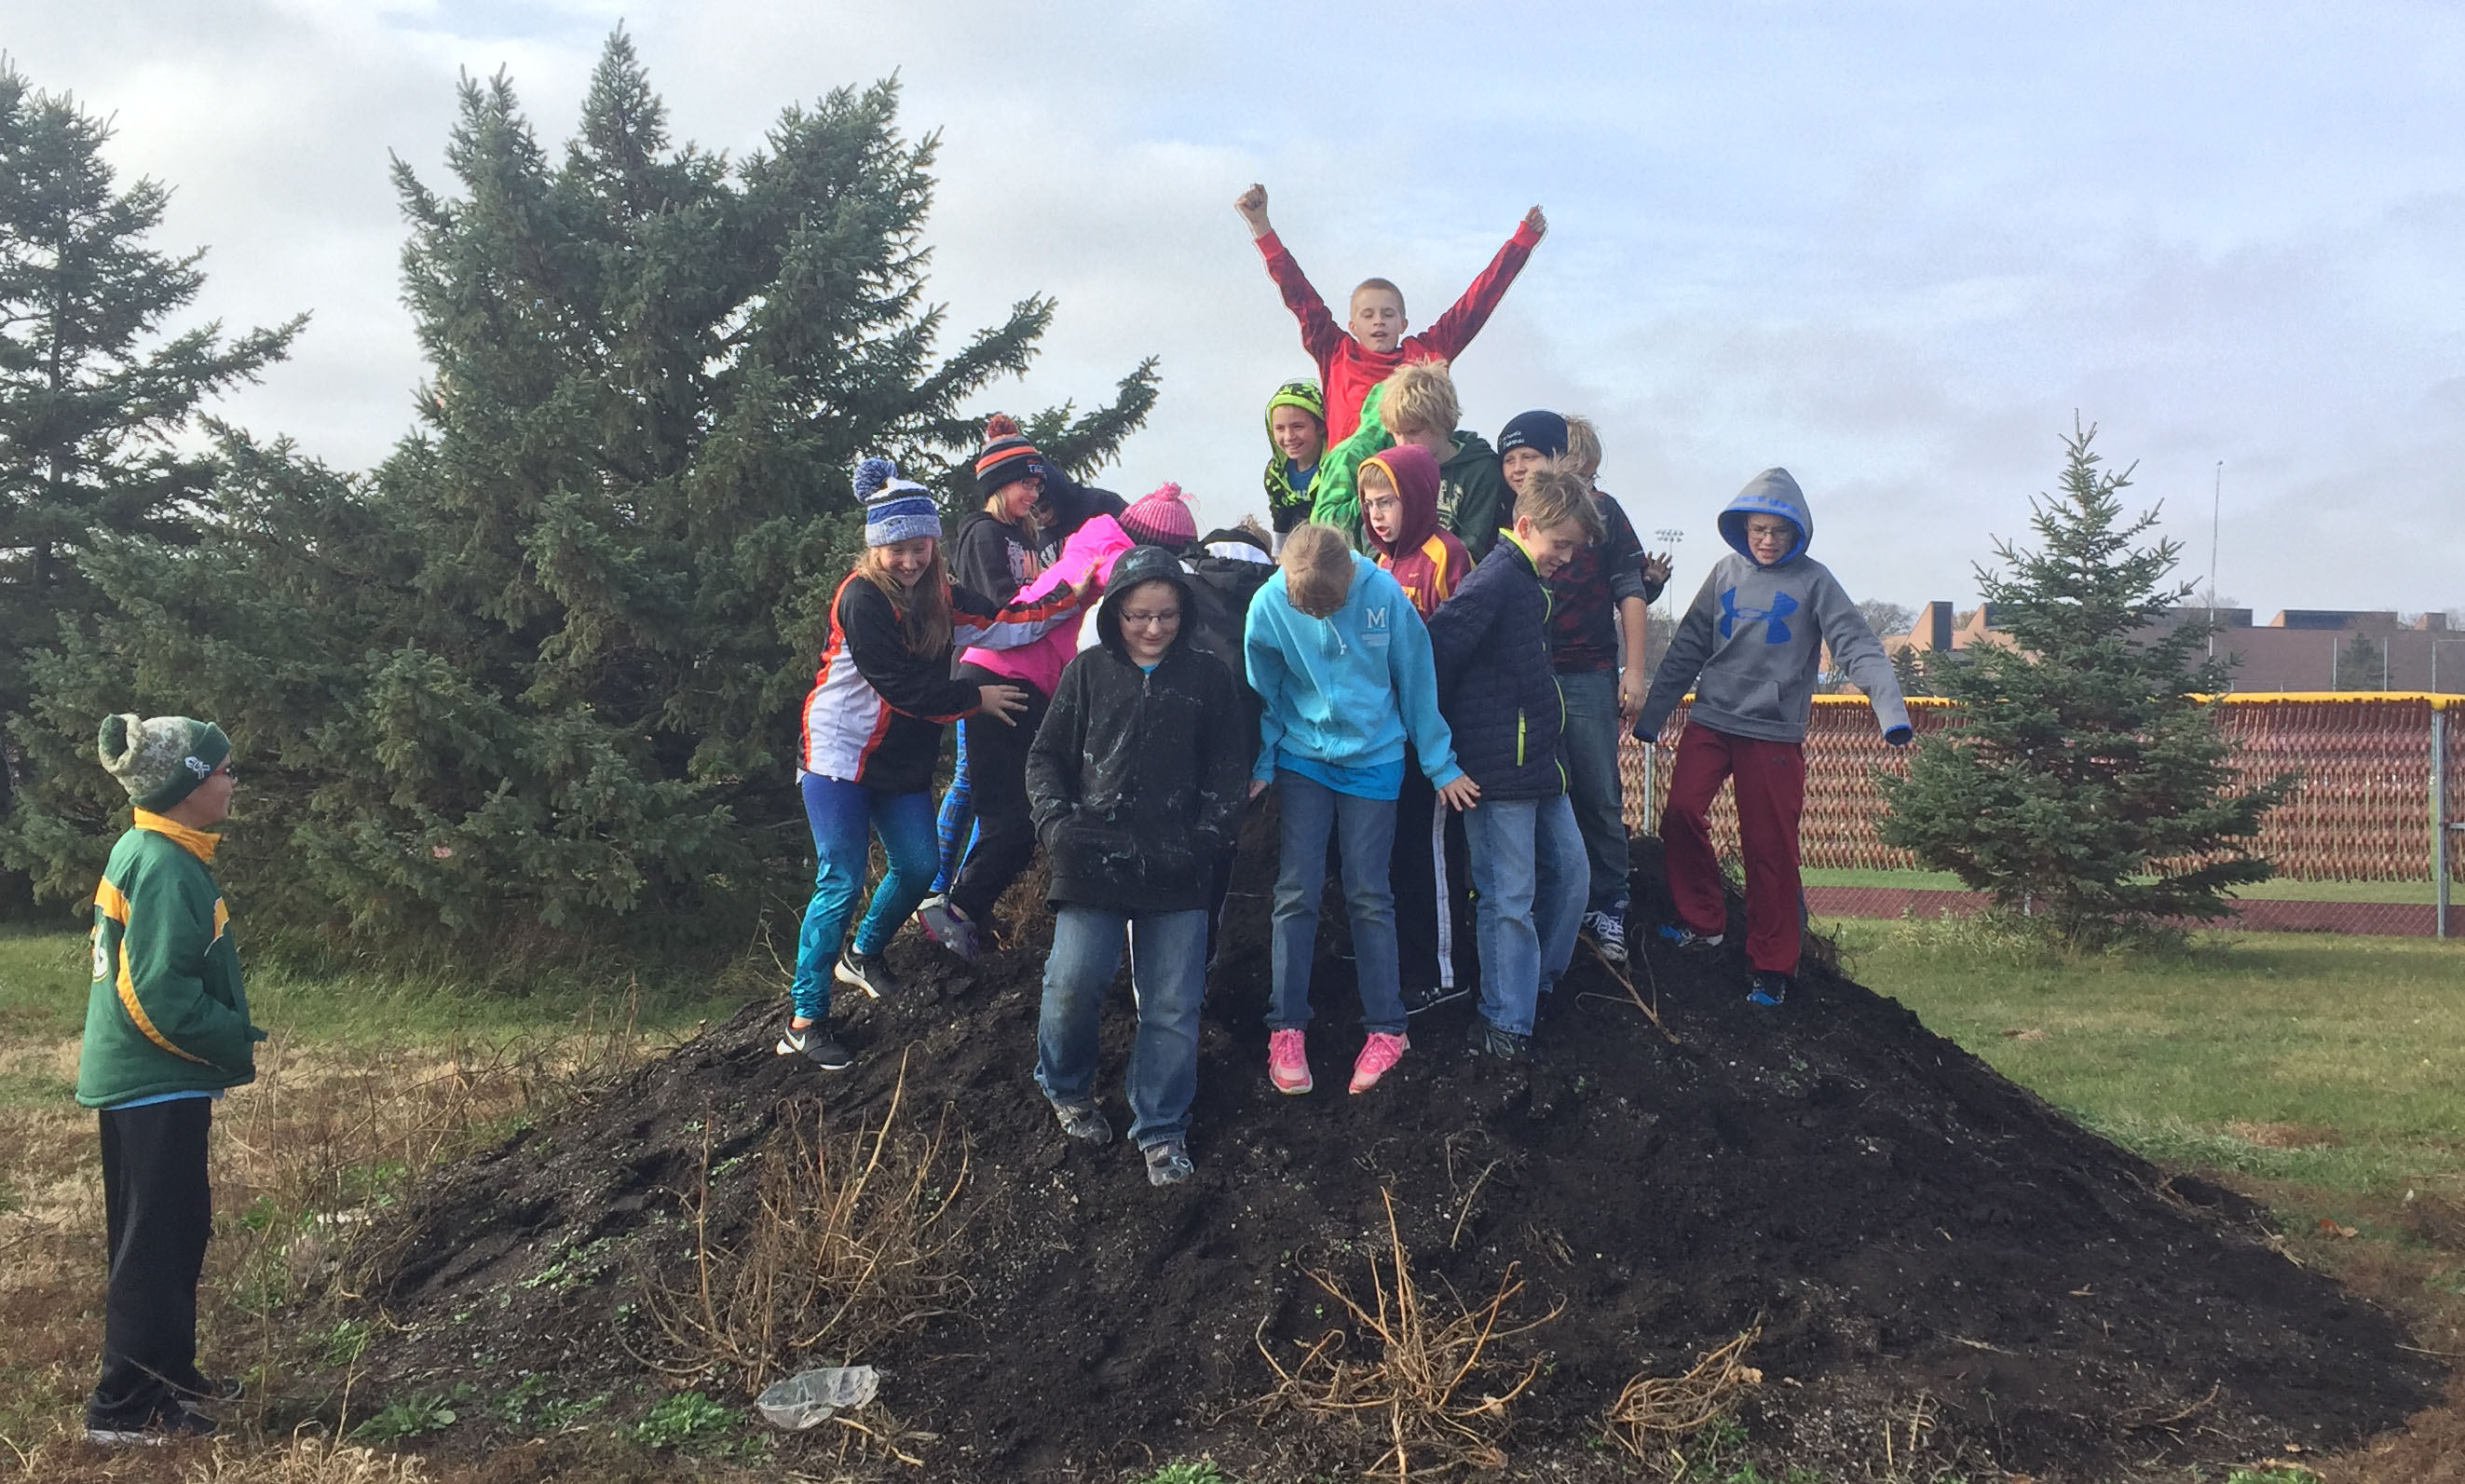 UMN Morris teamed up with the Morris Areas School District to start collecting organics in 2017, collecting nearly 100,000 lbs in the first two years.